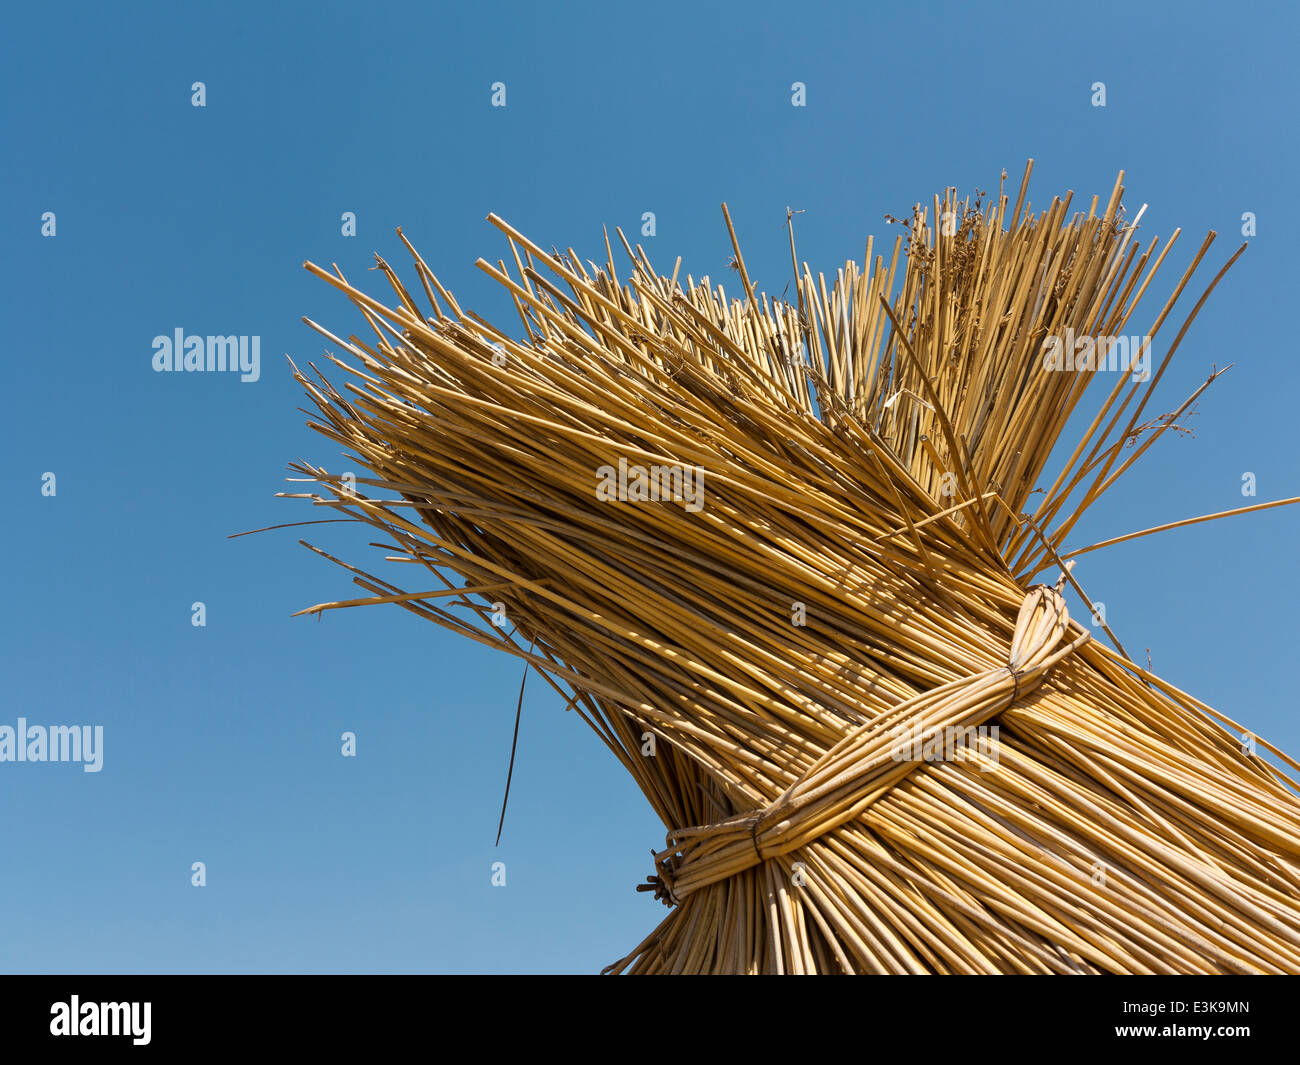 Close up detail the gathered top of straw sunshade umbrella against a vivid blue sky Stock Photo